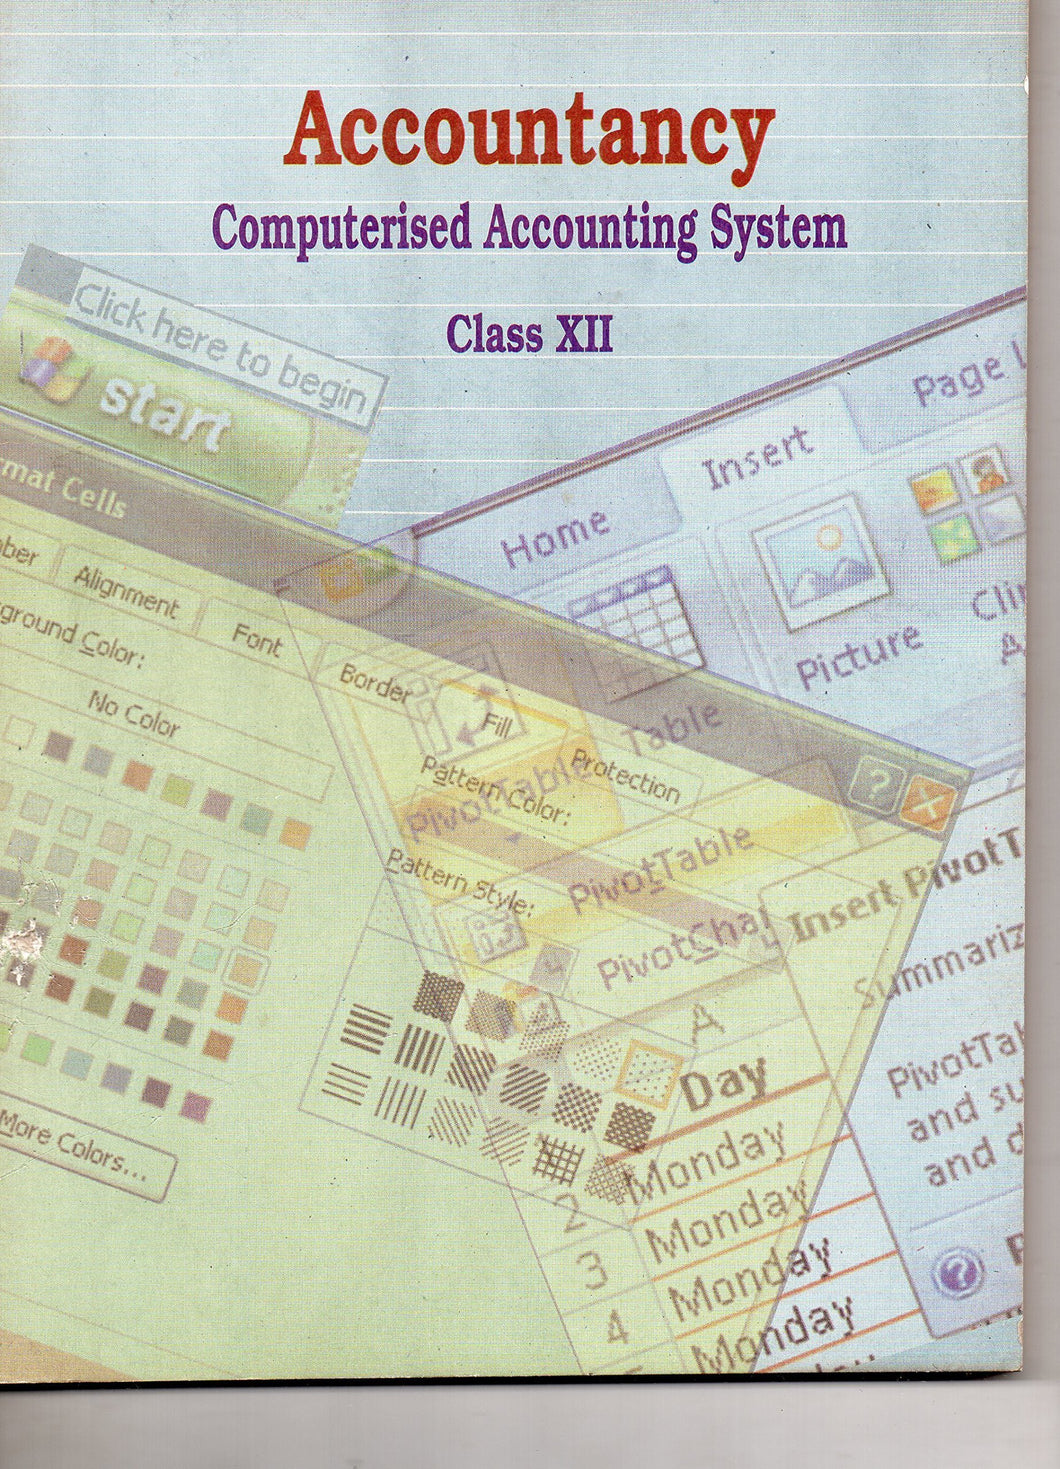 NCERT Accountancy - Computer Accounting System for Class 12 - latest edition as per NCERT/CBSE